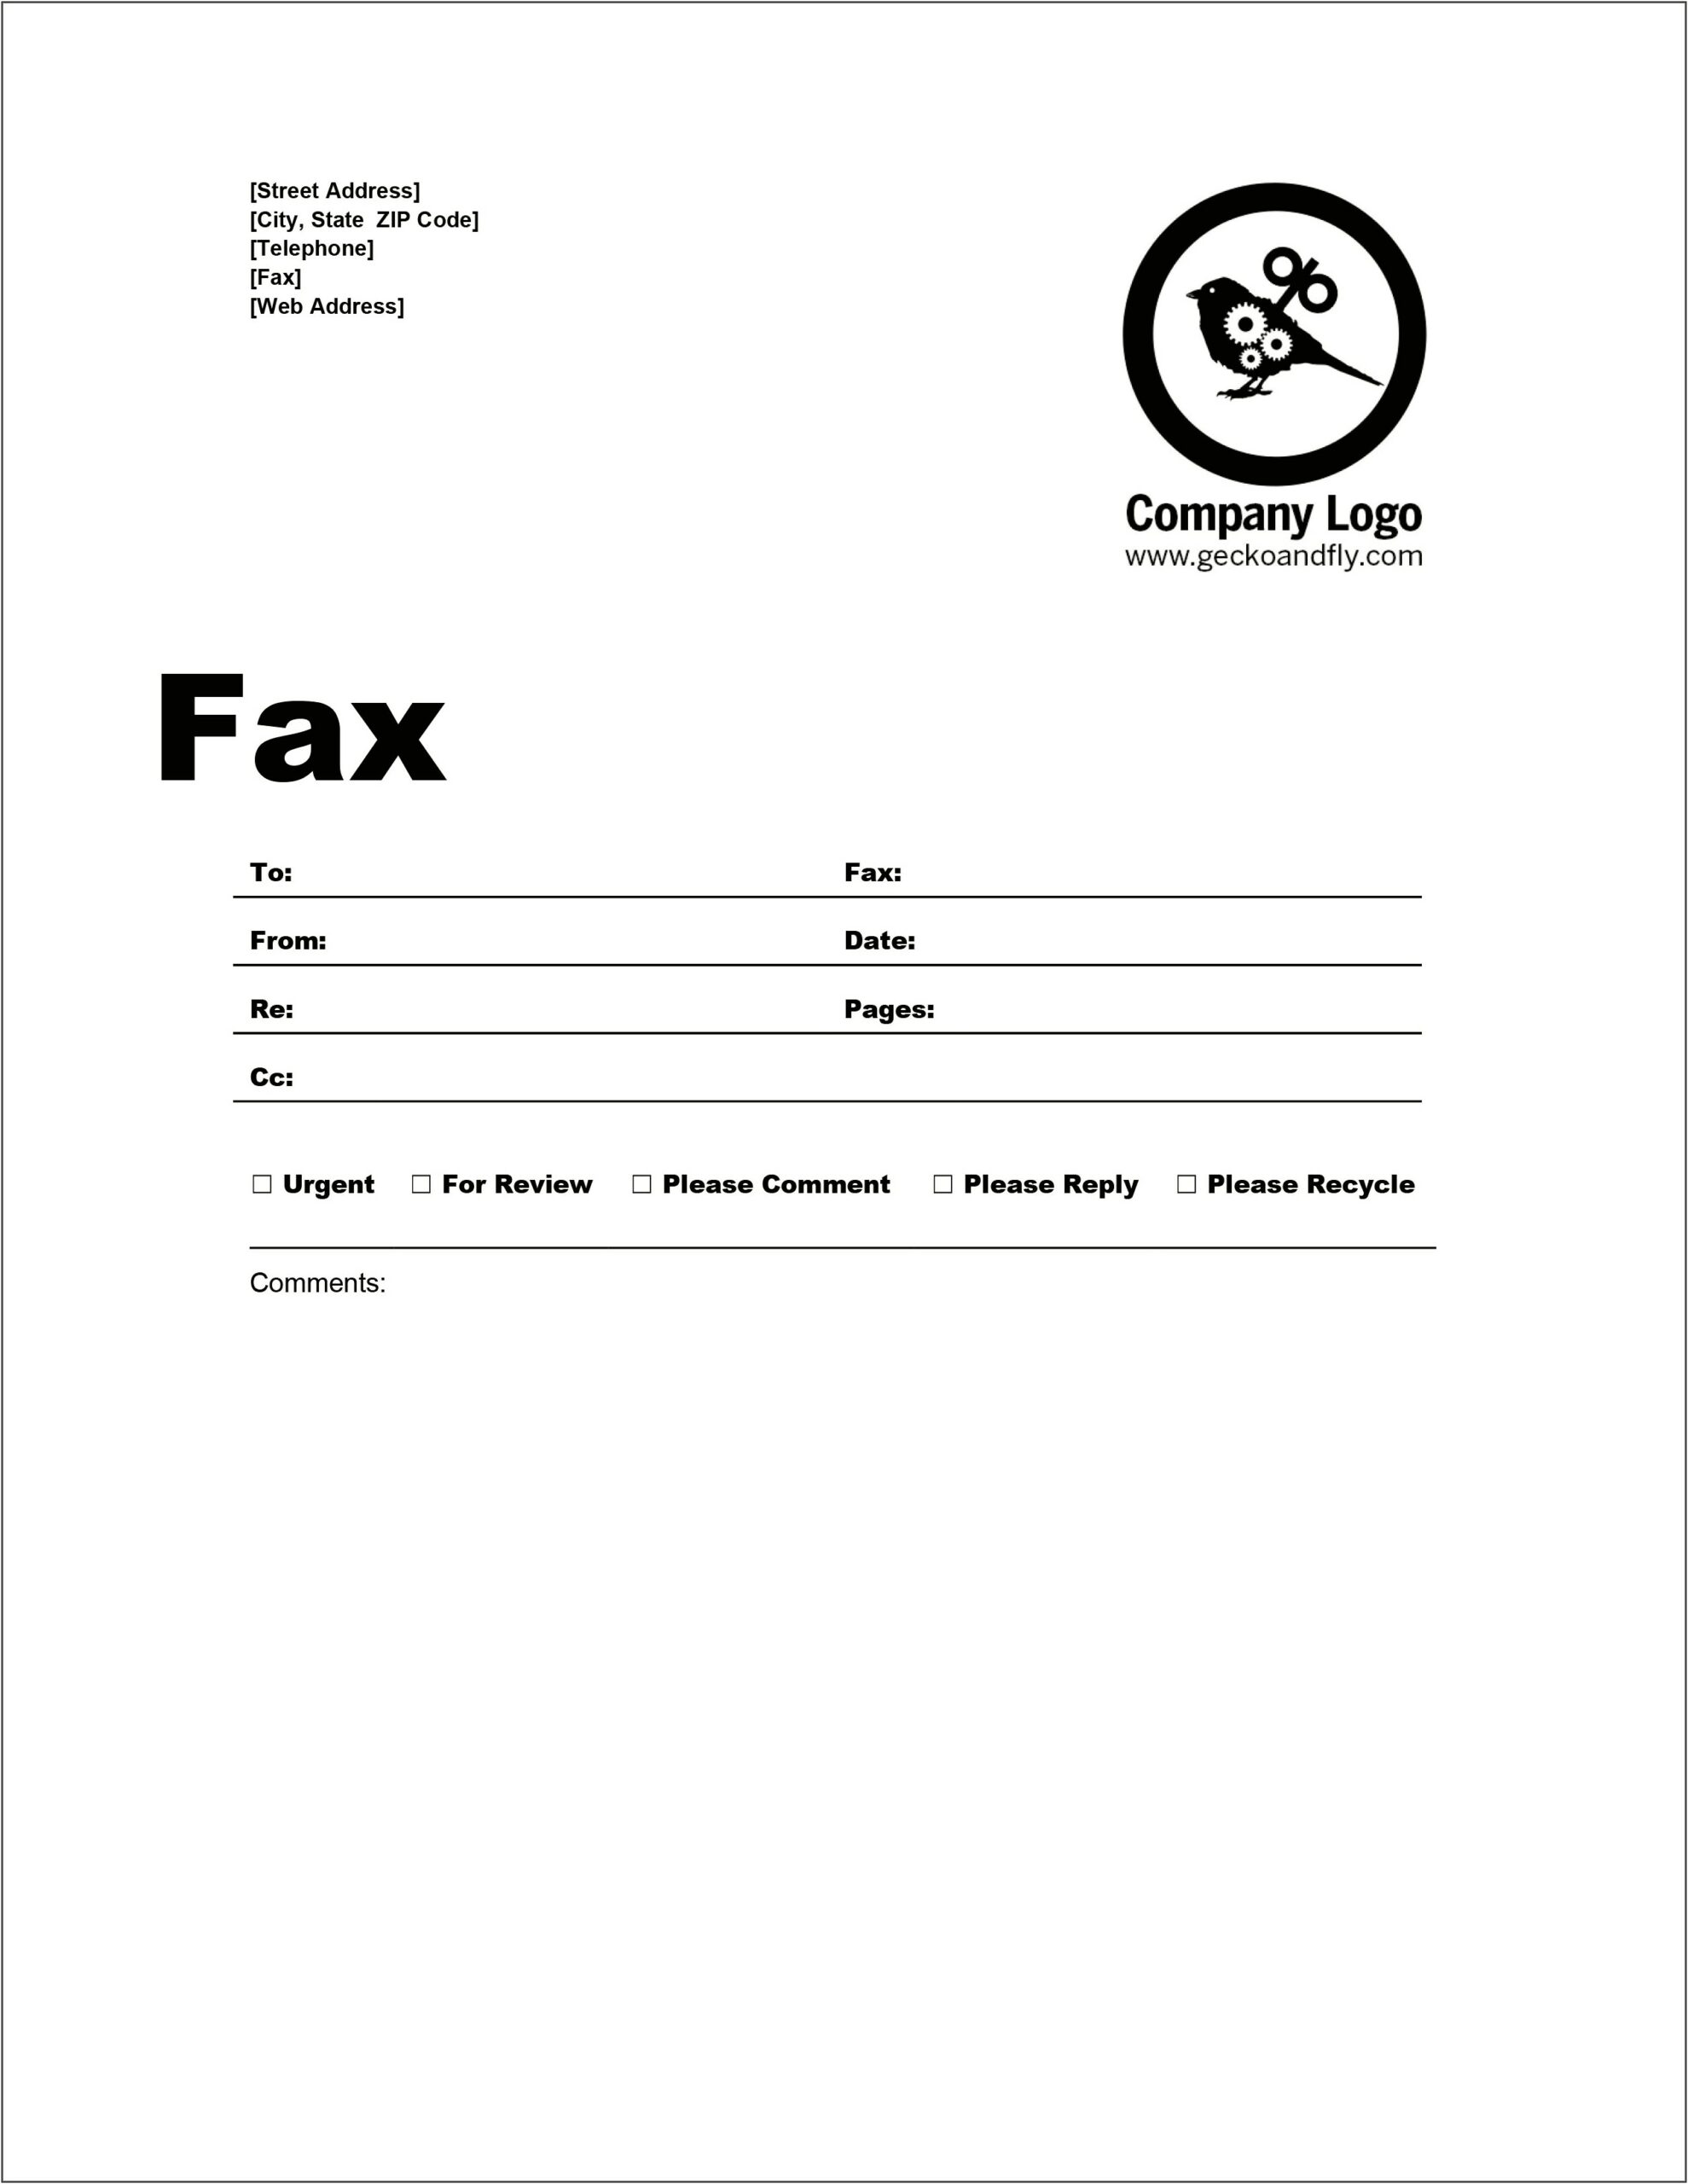 Free Resume Fax Cover Sheet Template